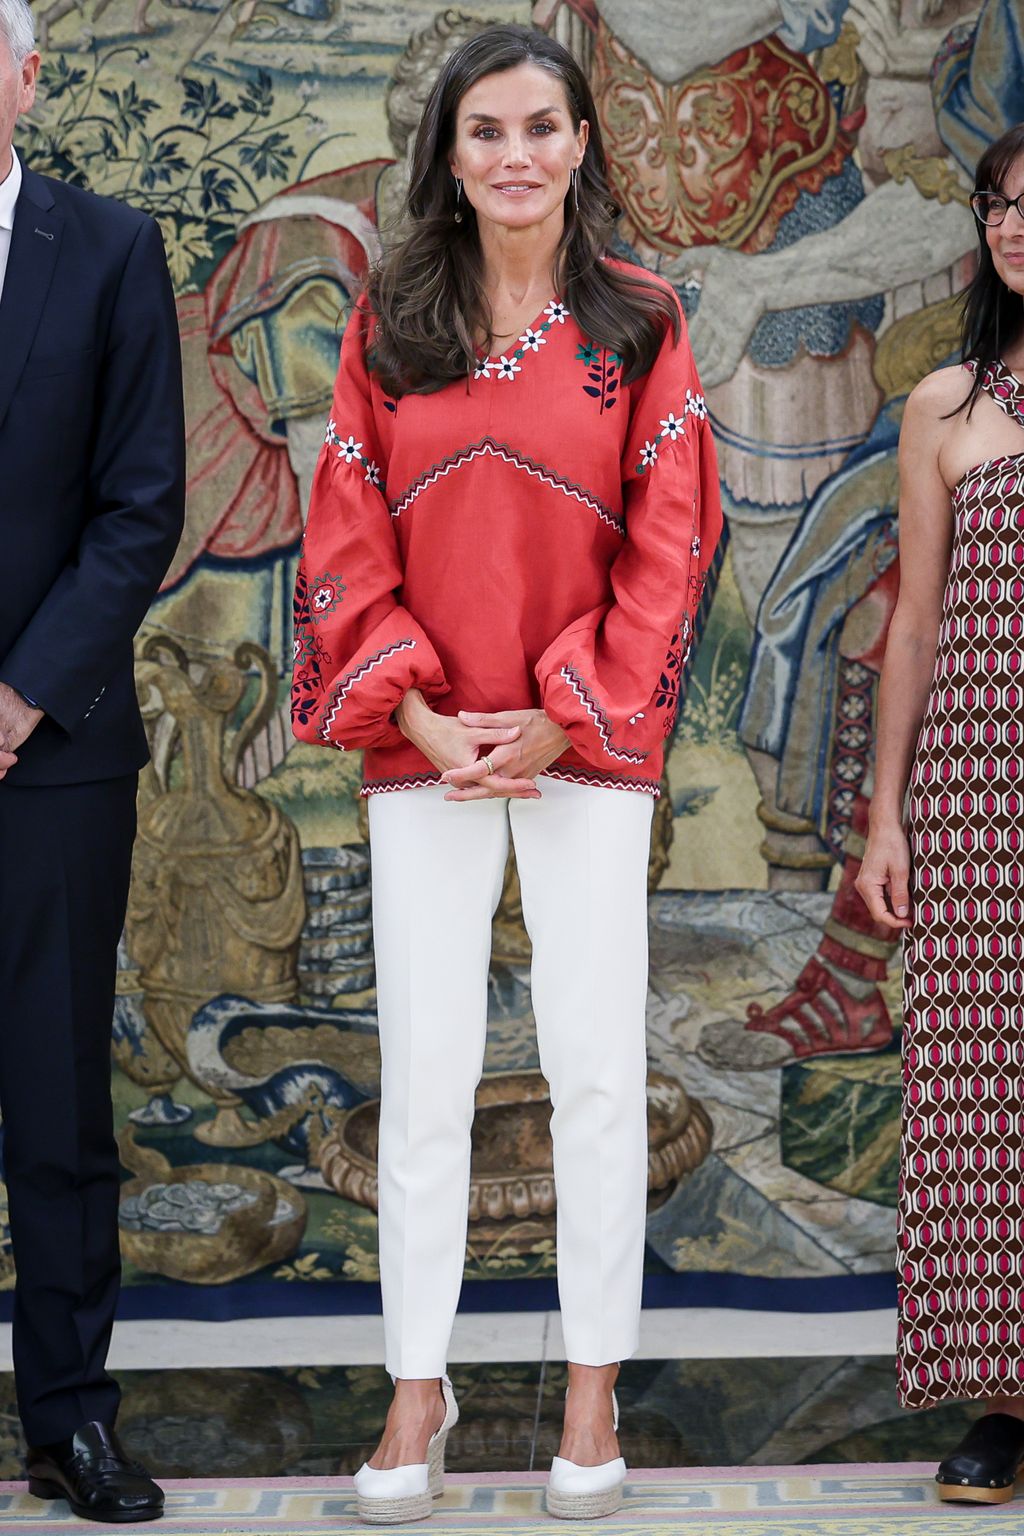 Queen Letizia makes a political statement in skinny jeans and symbolic ...